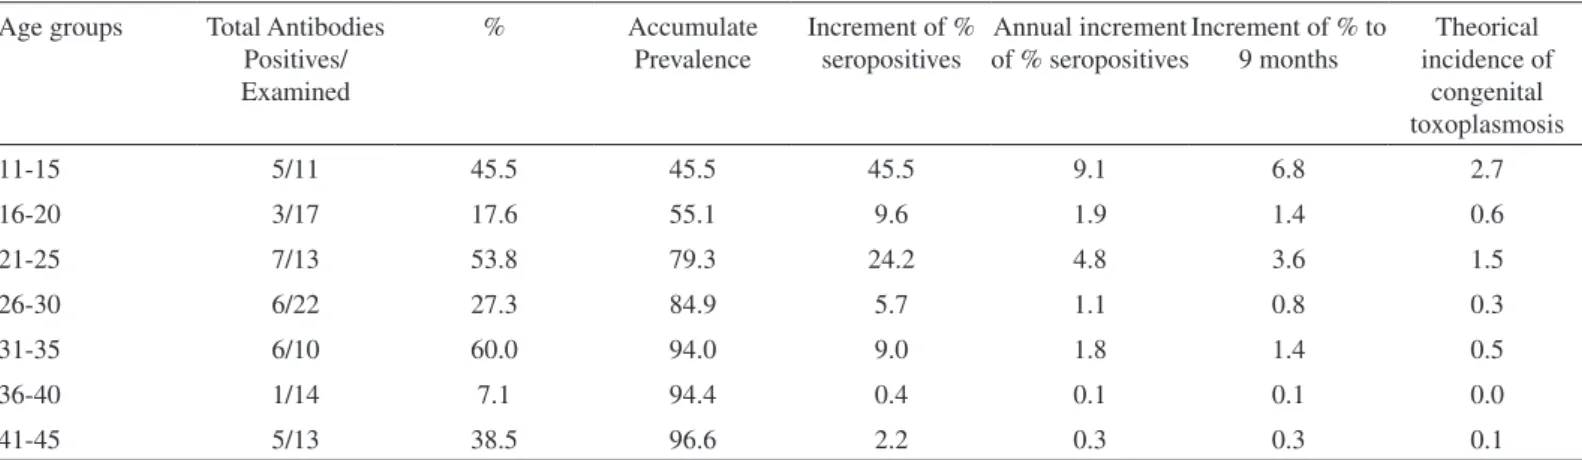 Table 1 represents the prevalence of anti- T. gondii total antibodies and  the theoretical annual estimated incidence of congenital toxoplasmosis in  childbearing age women from the studied groups